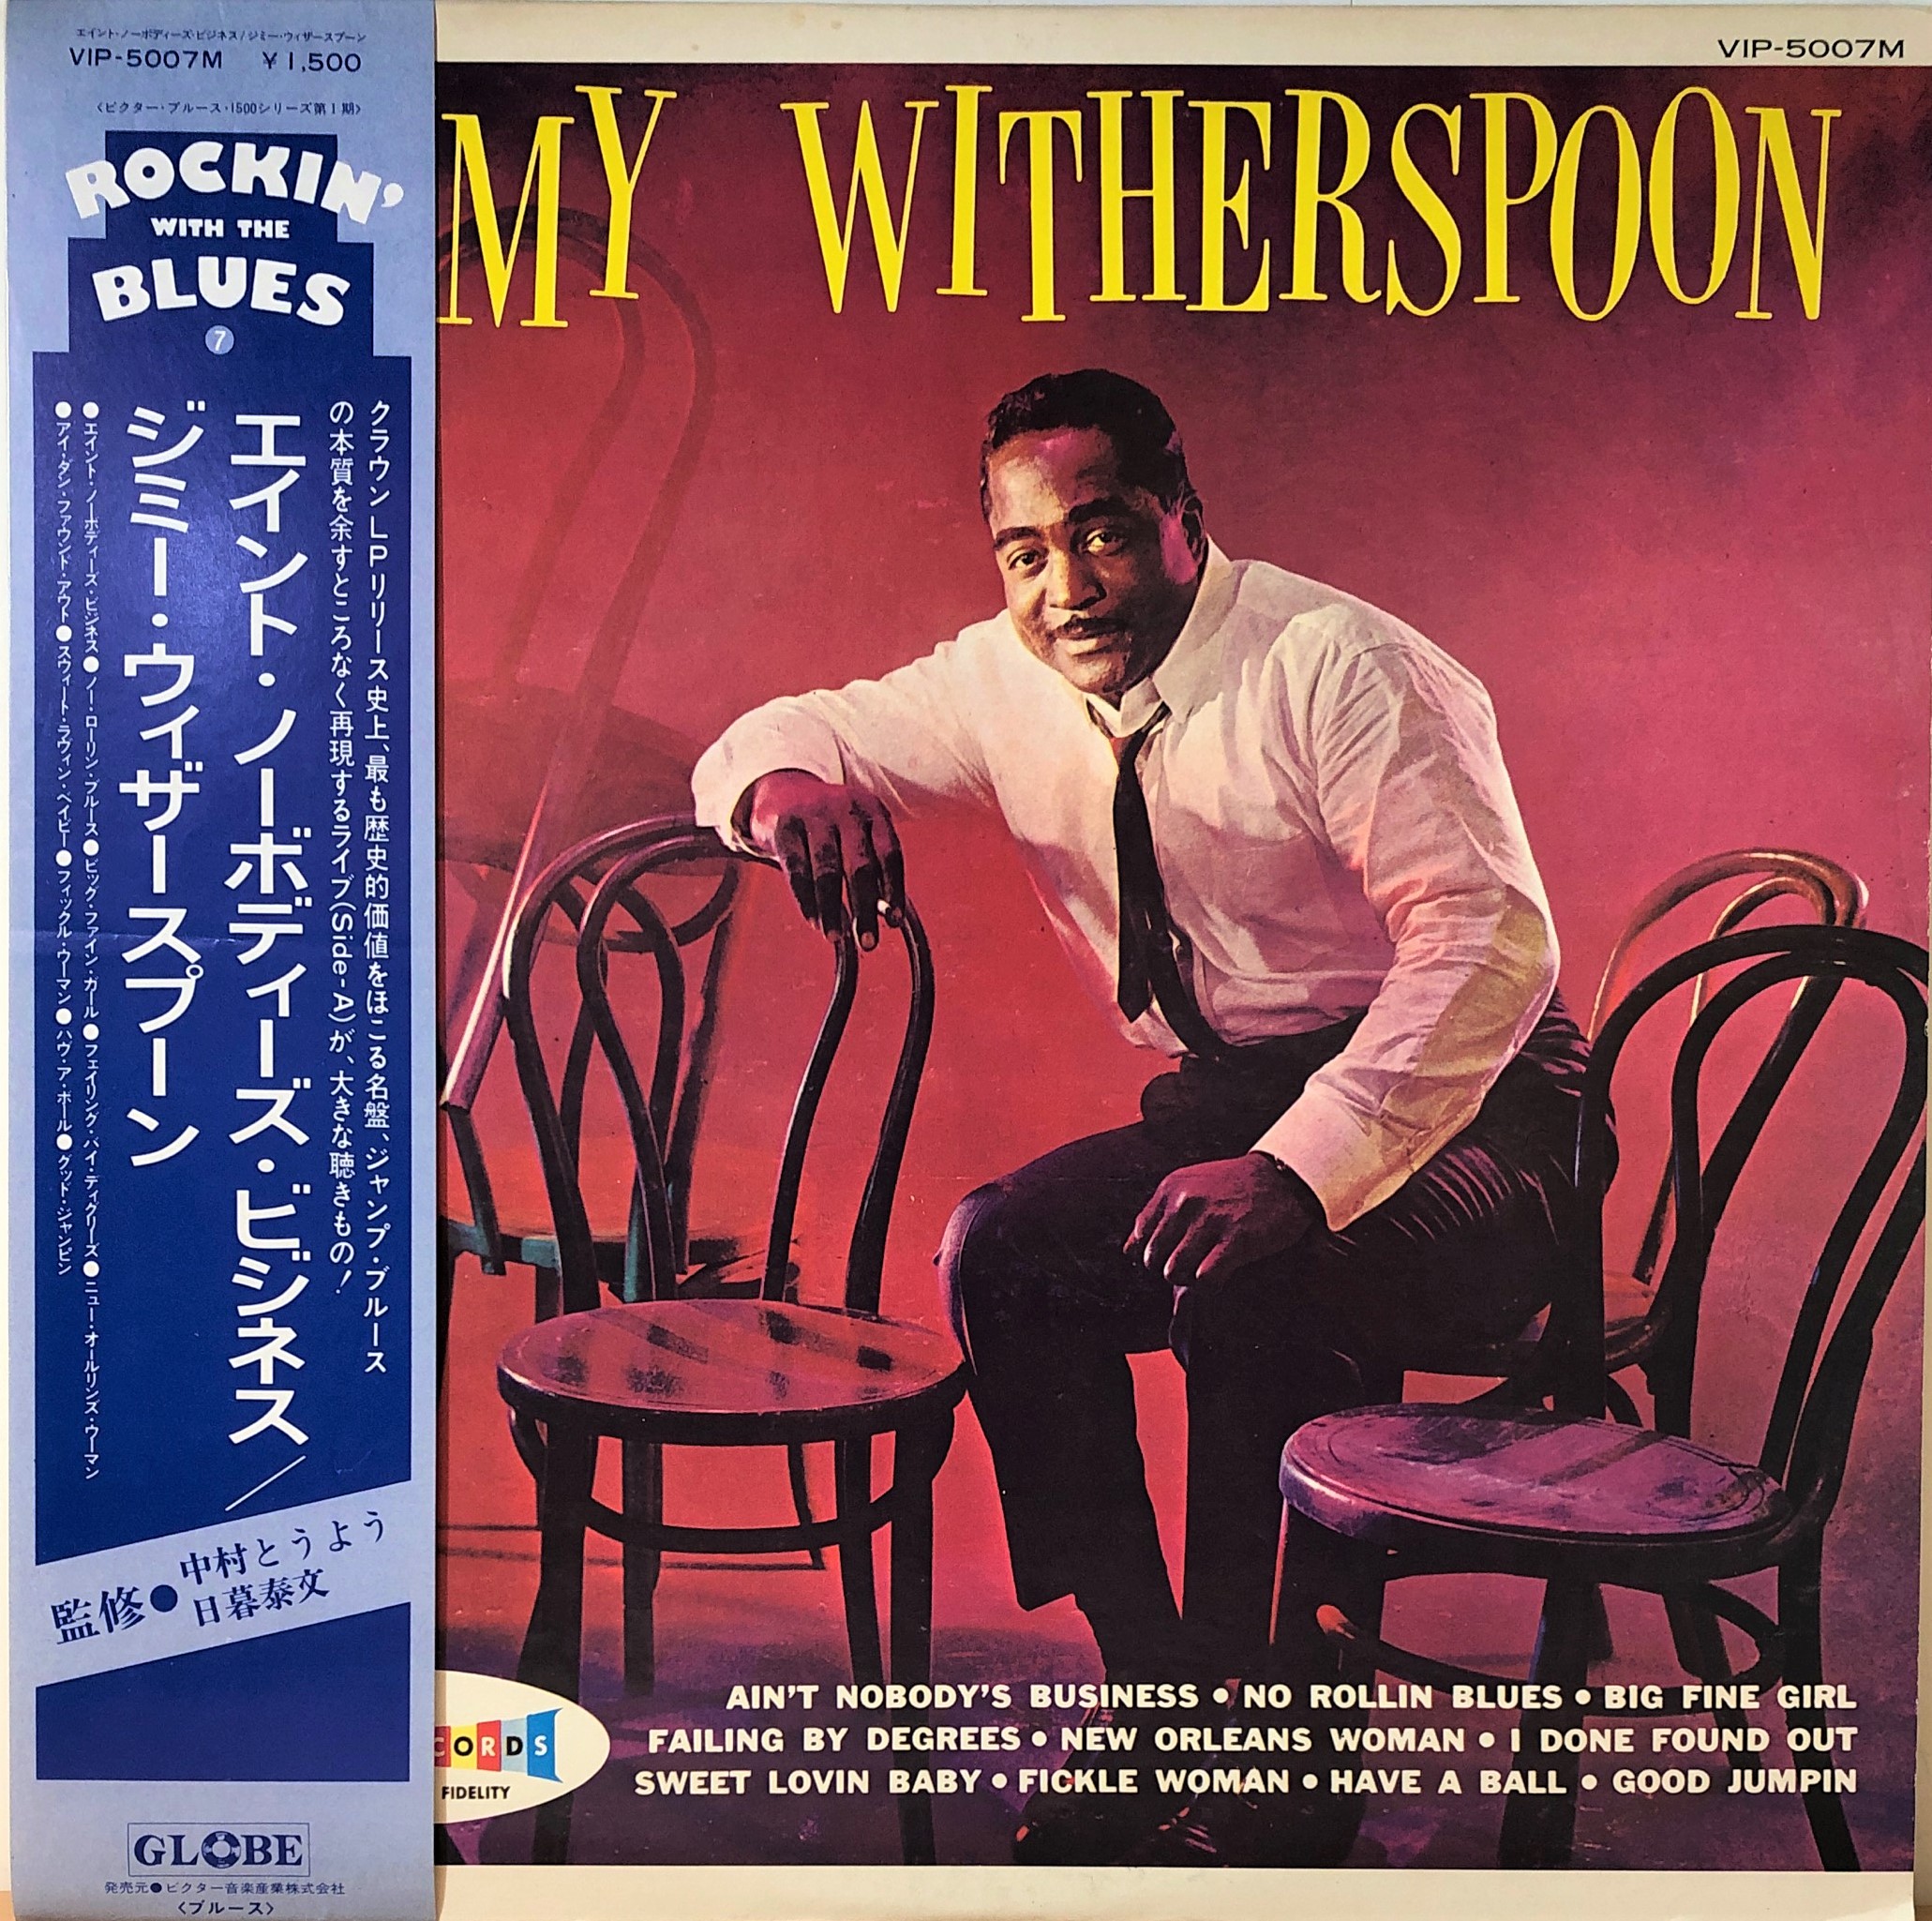 Jimmy Witherspoon ‎– Jimmy Witherspoon | 中古レコード通販・買取の 